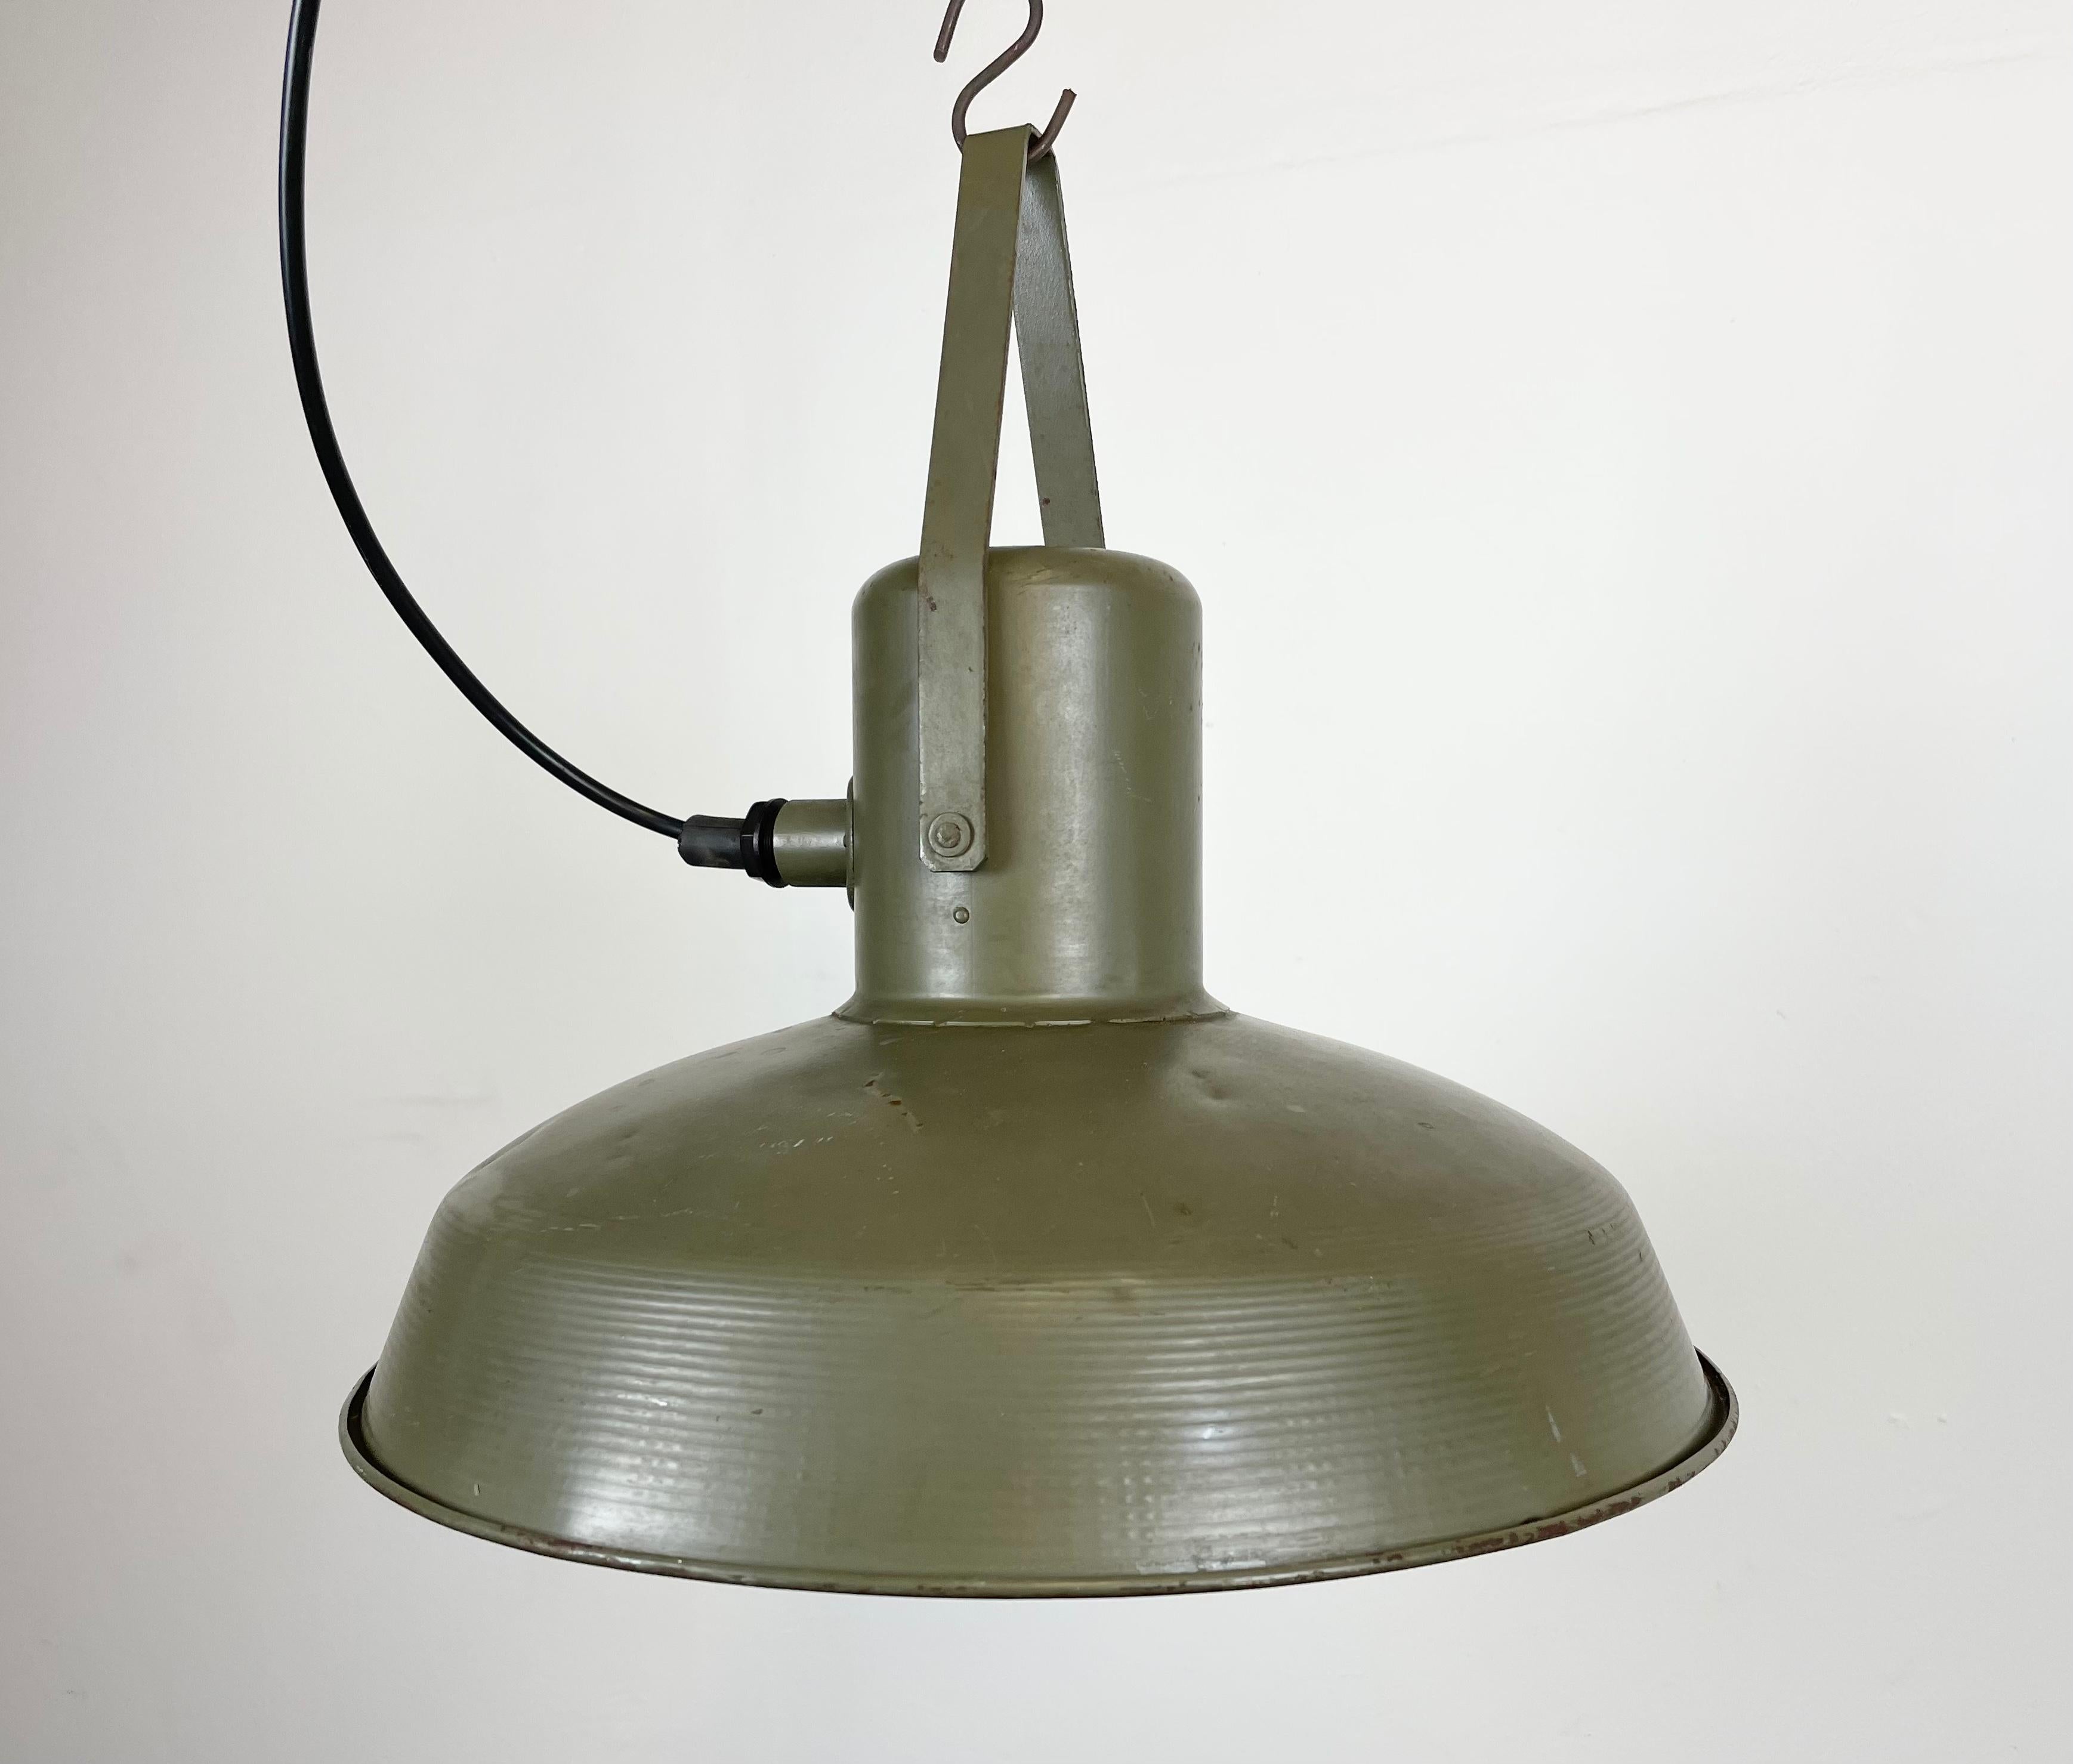 This pendant lamp was made in former Czechoslovakia during the 1960s for use in the army. It is made from green metal. Lamp is fully functional and holds standard E27 light bulbs. The weight of the light is 2 kg.